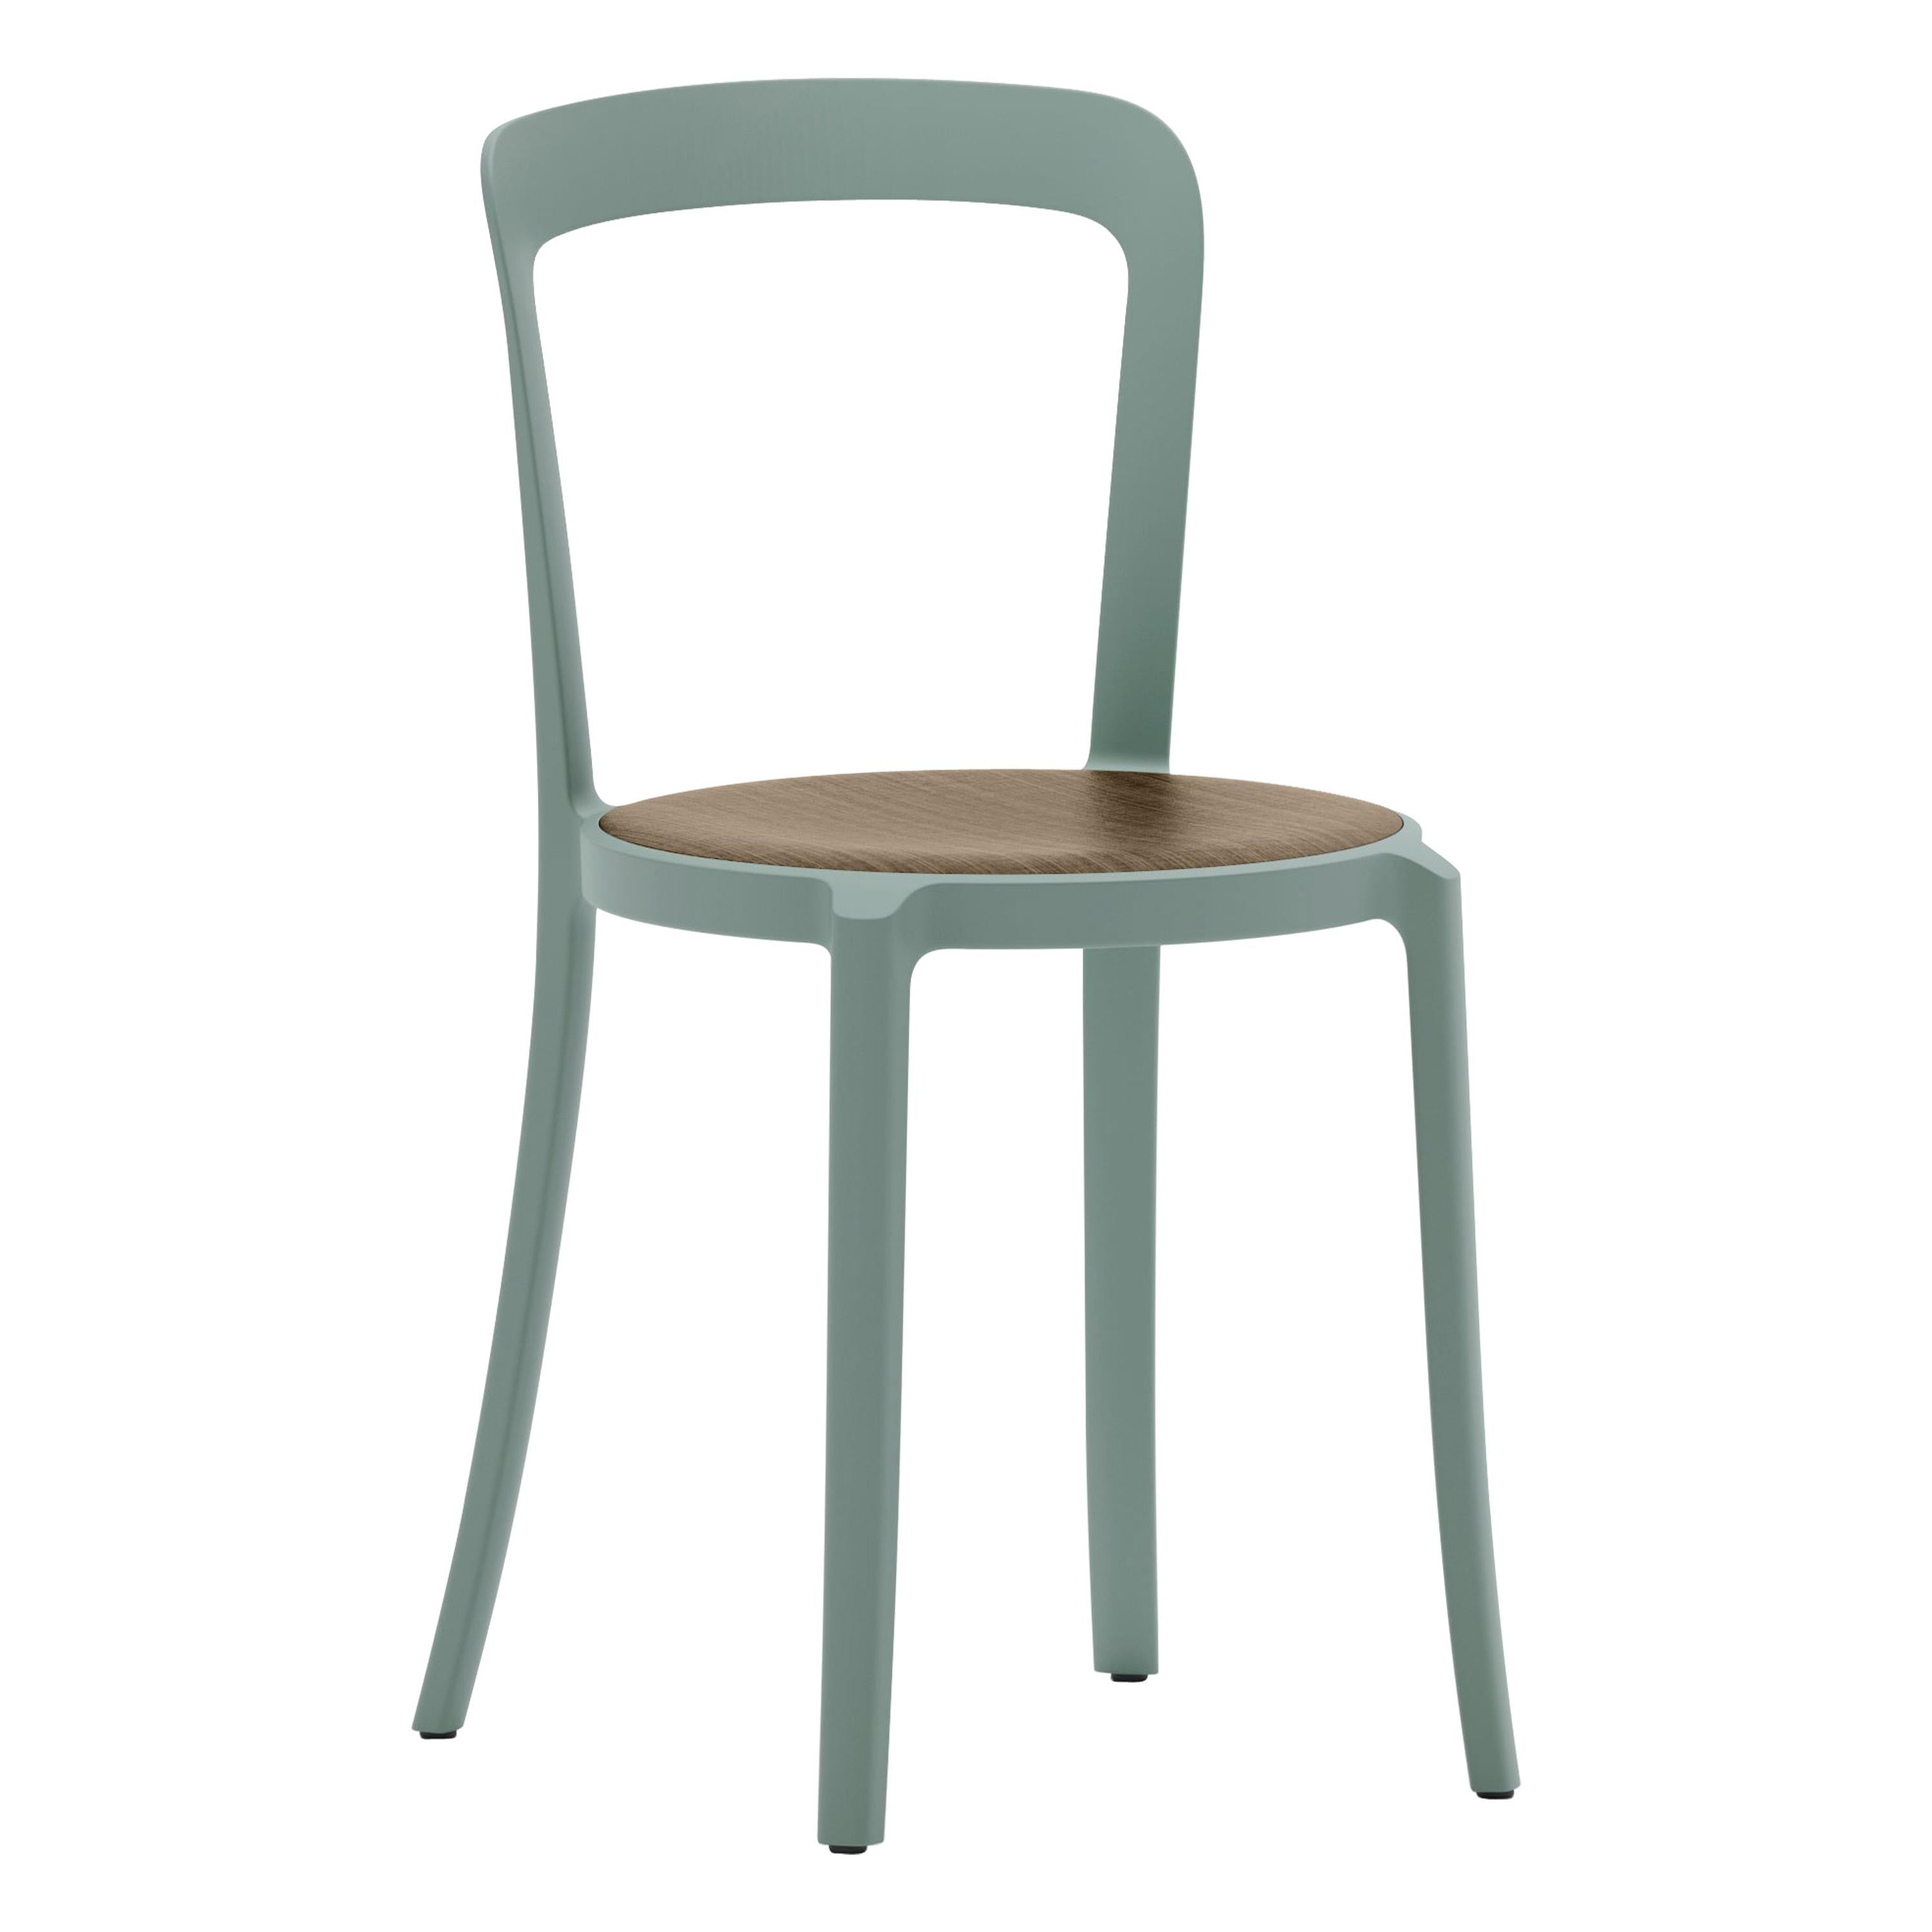 Emeco On & On Stacking Chair in Light Blue with Walnut seat by Barber & Osgerby For Sale